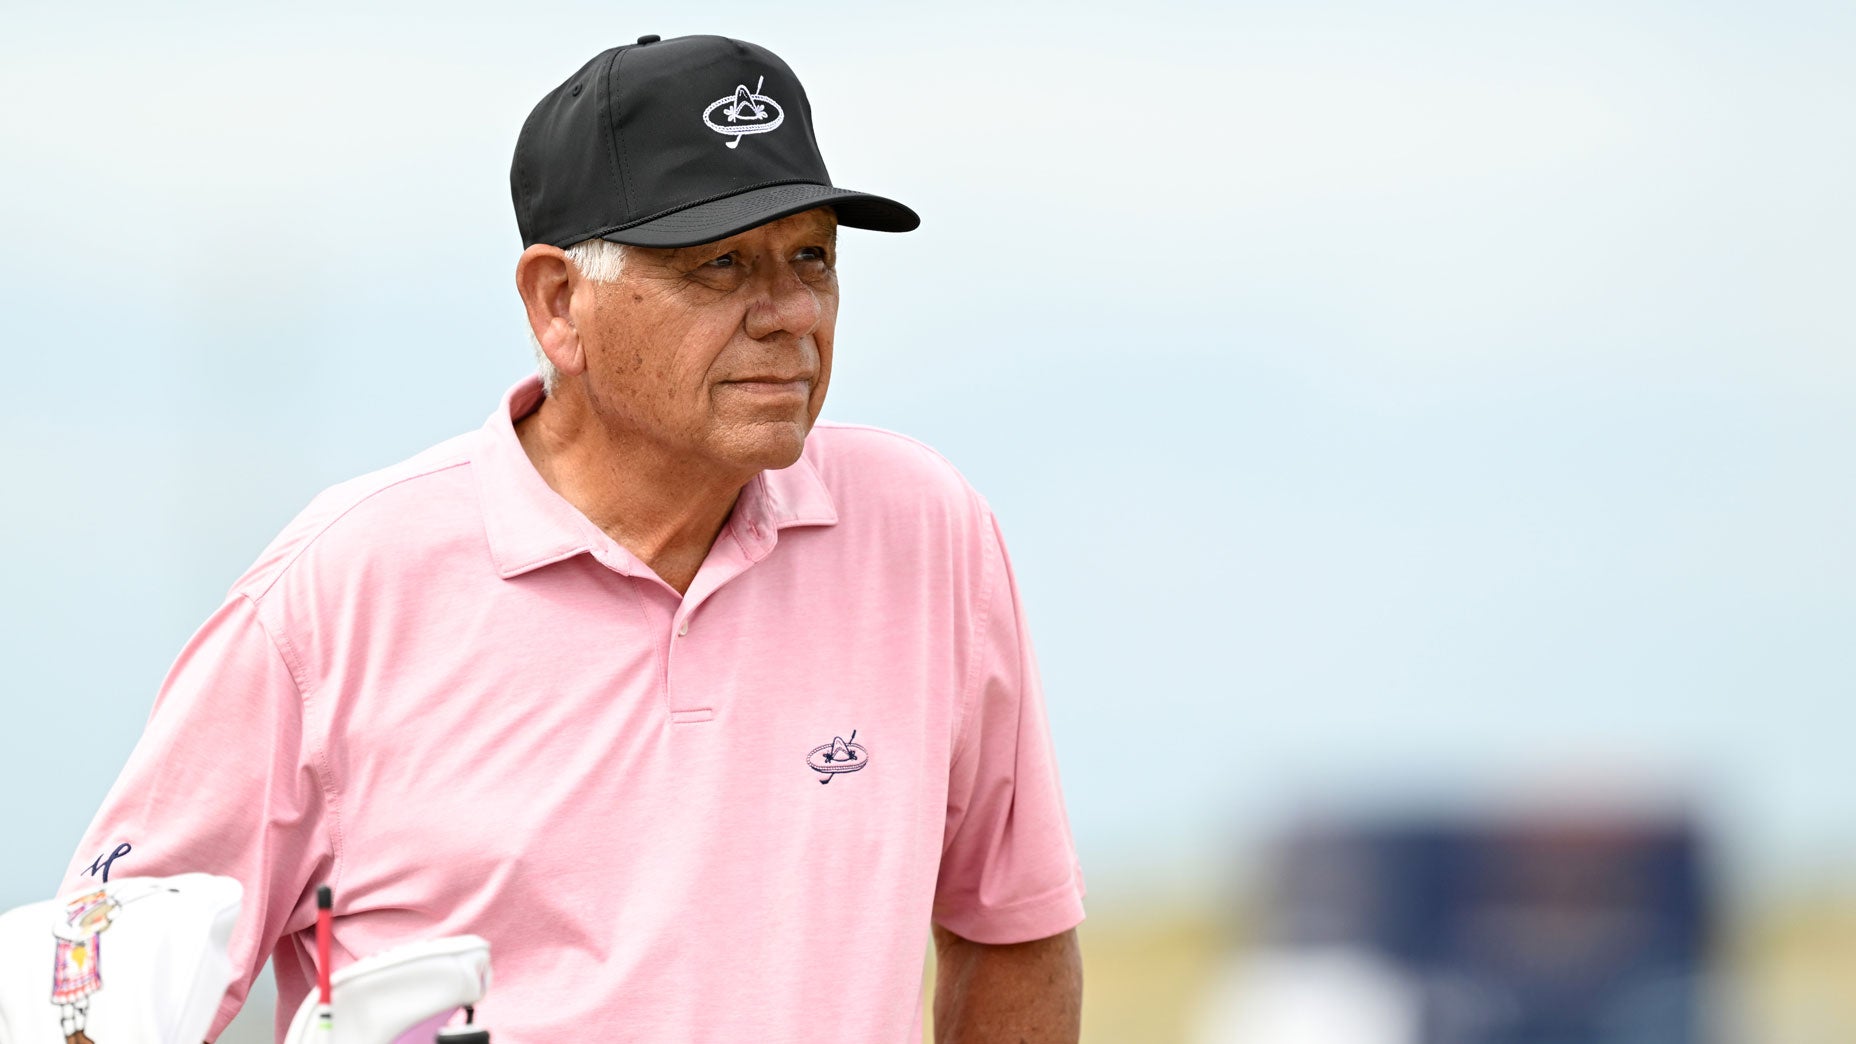 The sails are going to break on that ship:' Lee Trevino opens up on LIV